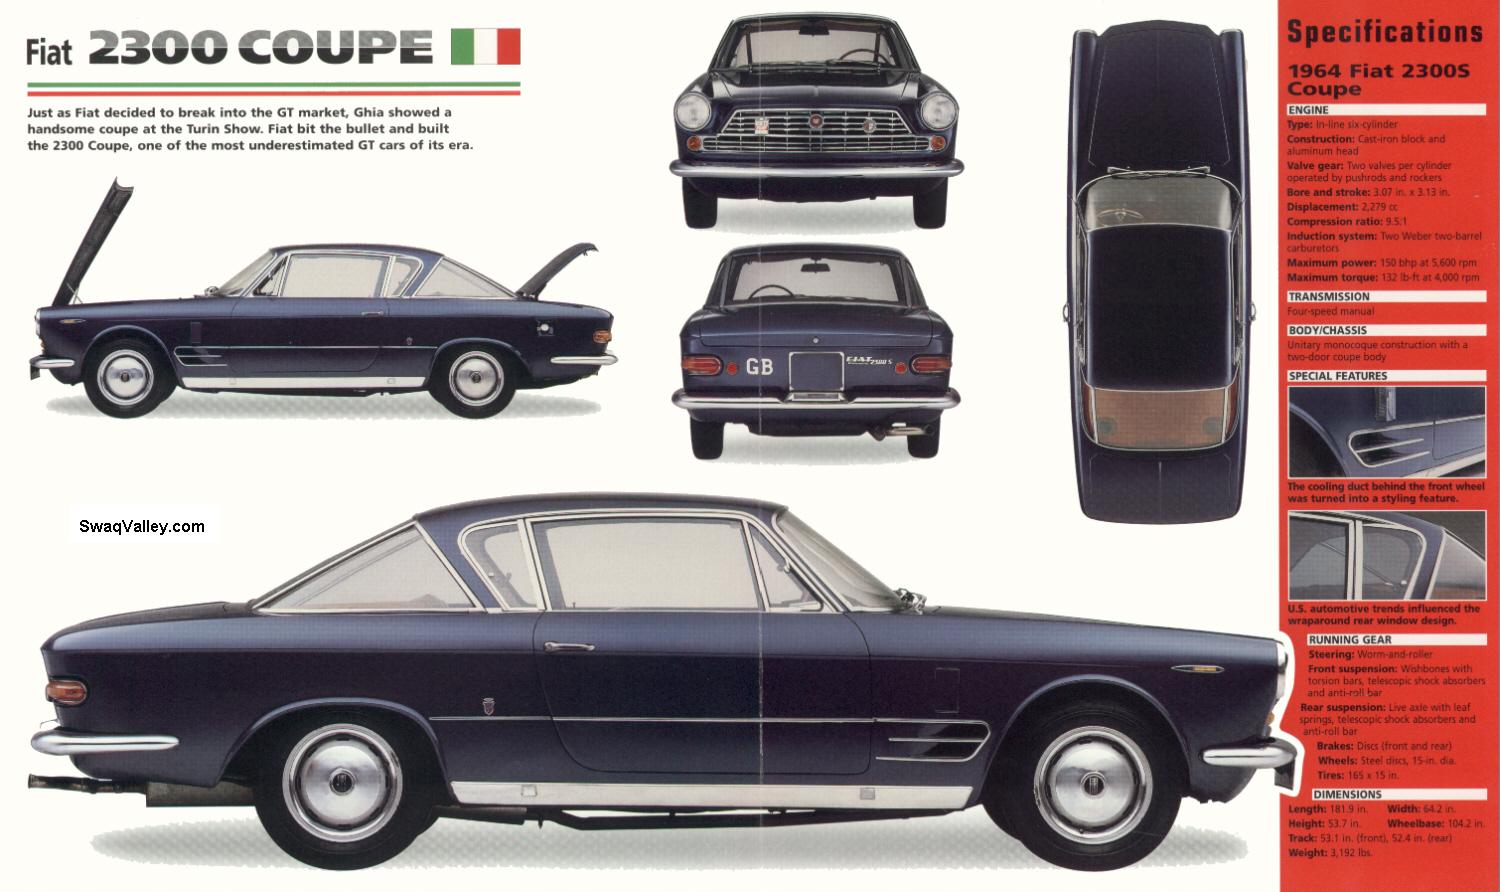 fiat 2300 coupe-pic. 1